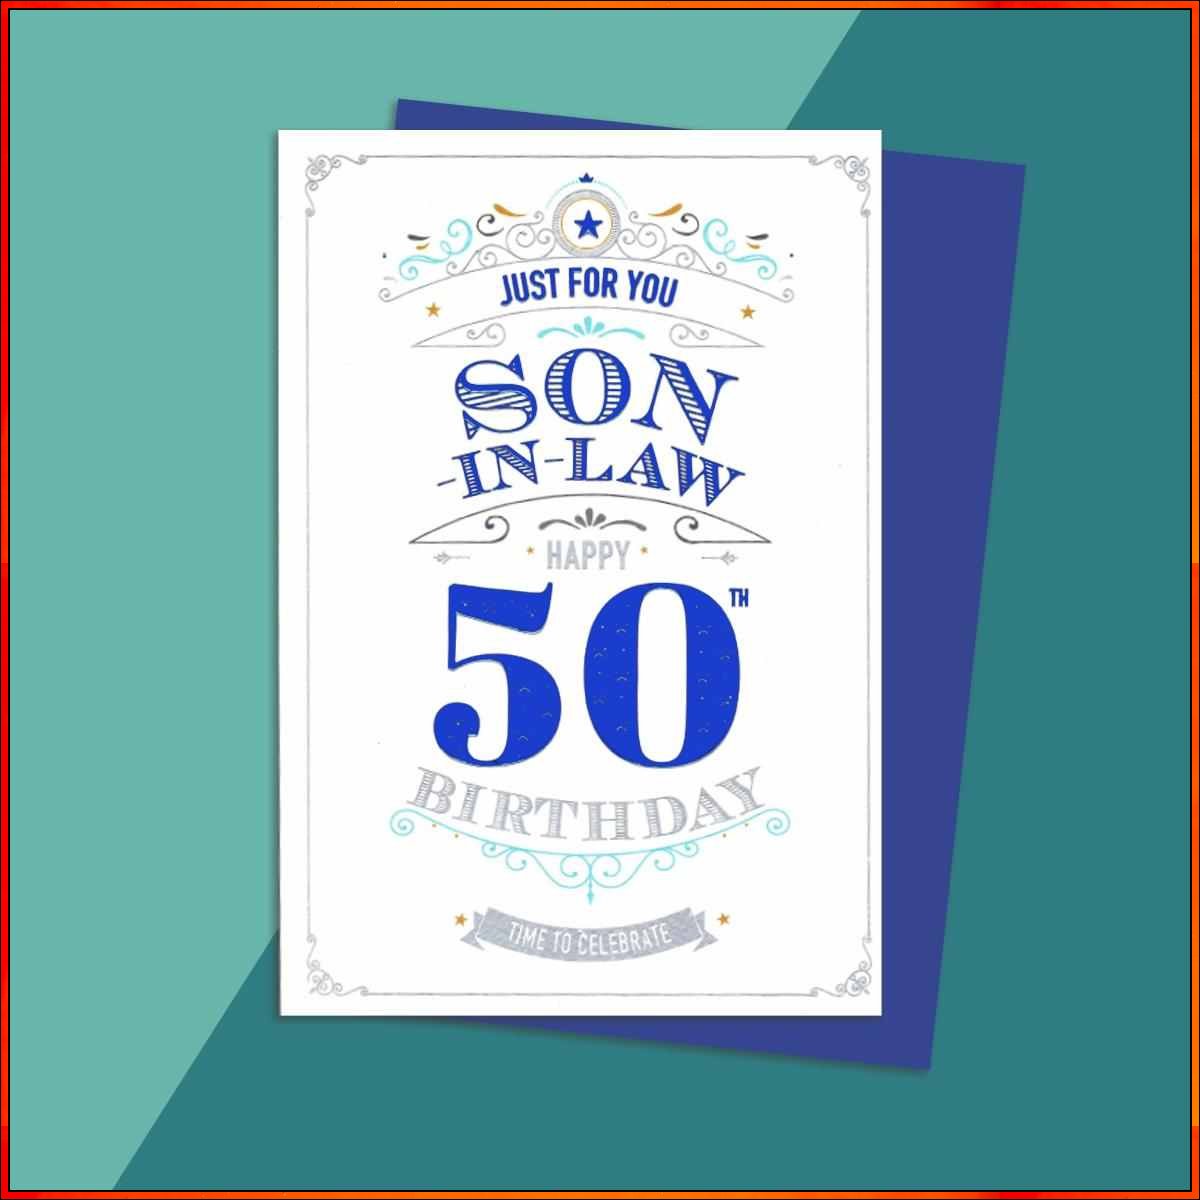 50th birthday son in law image
